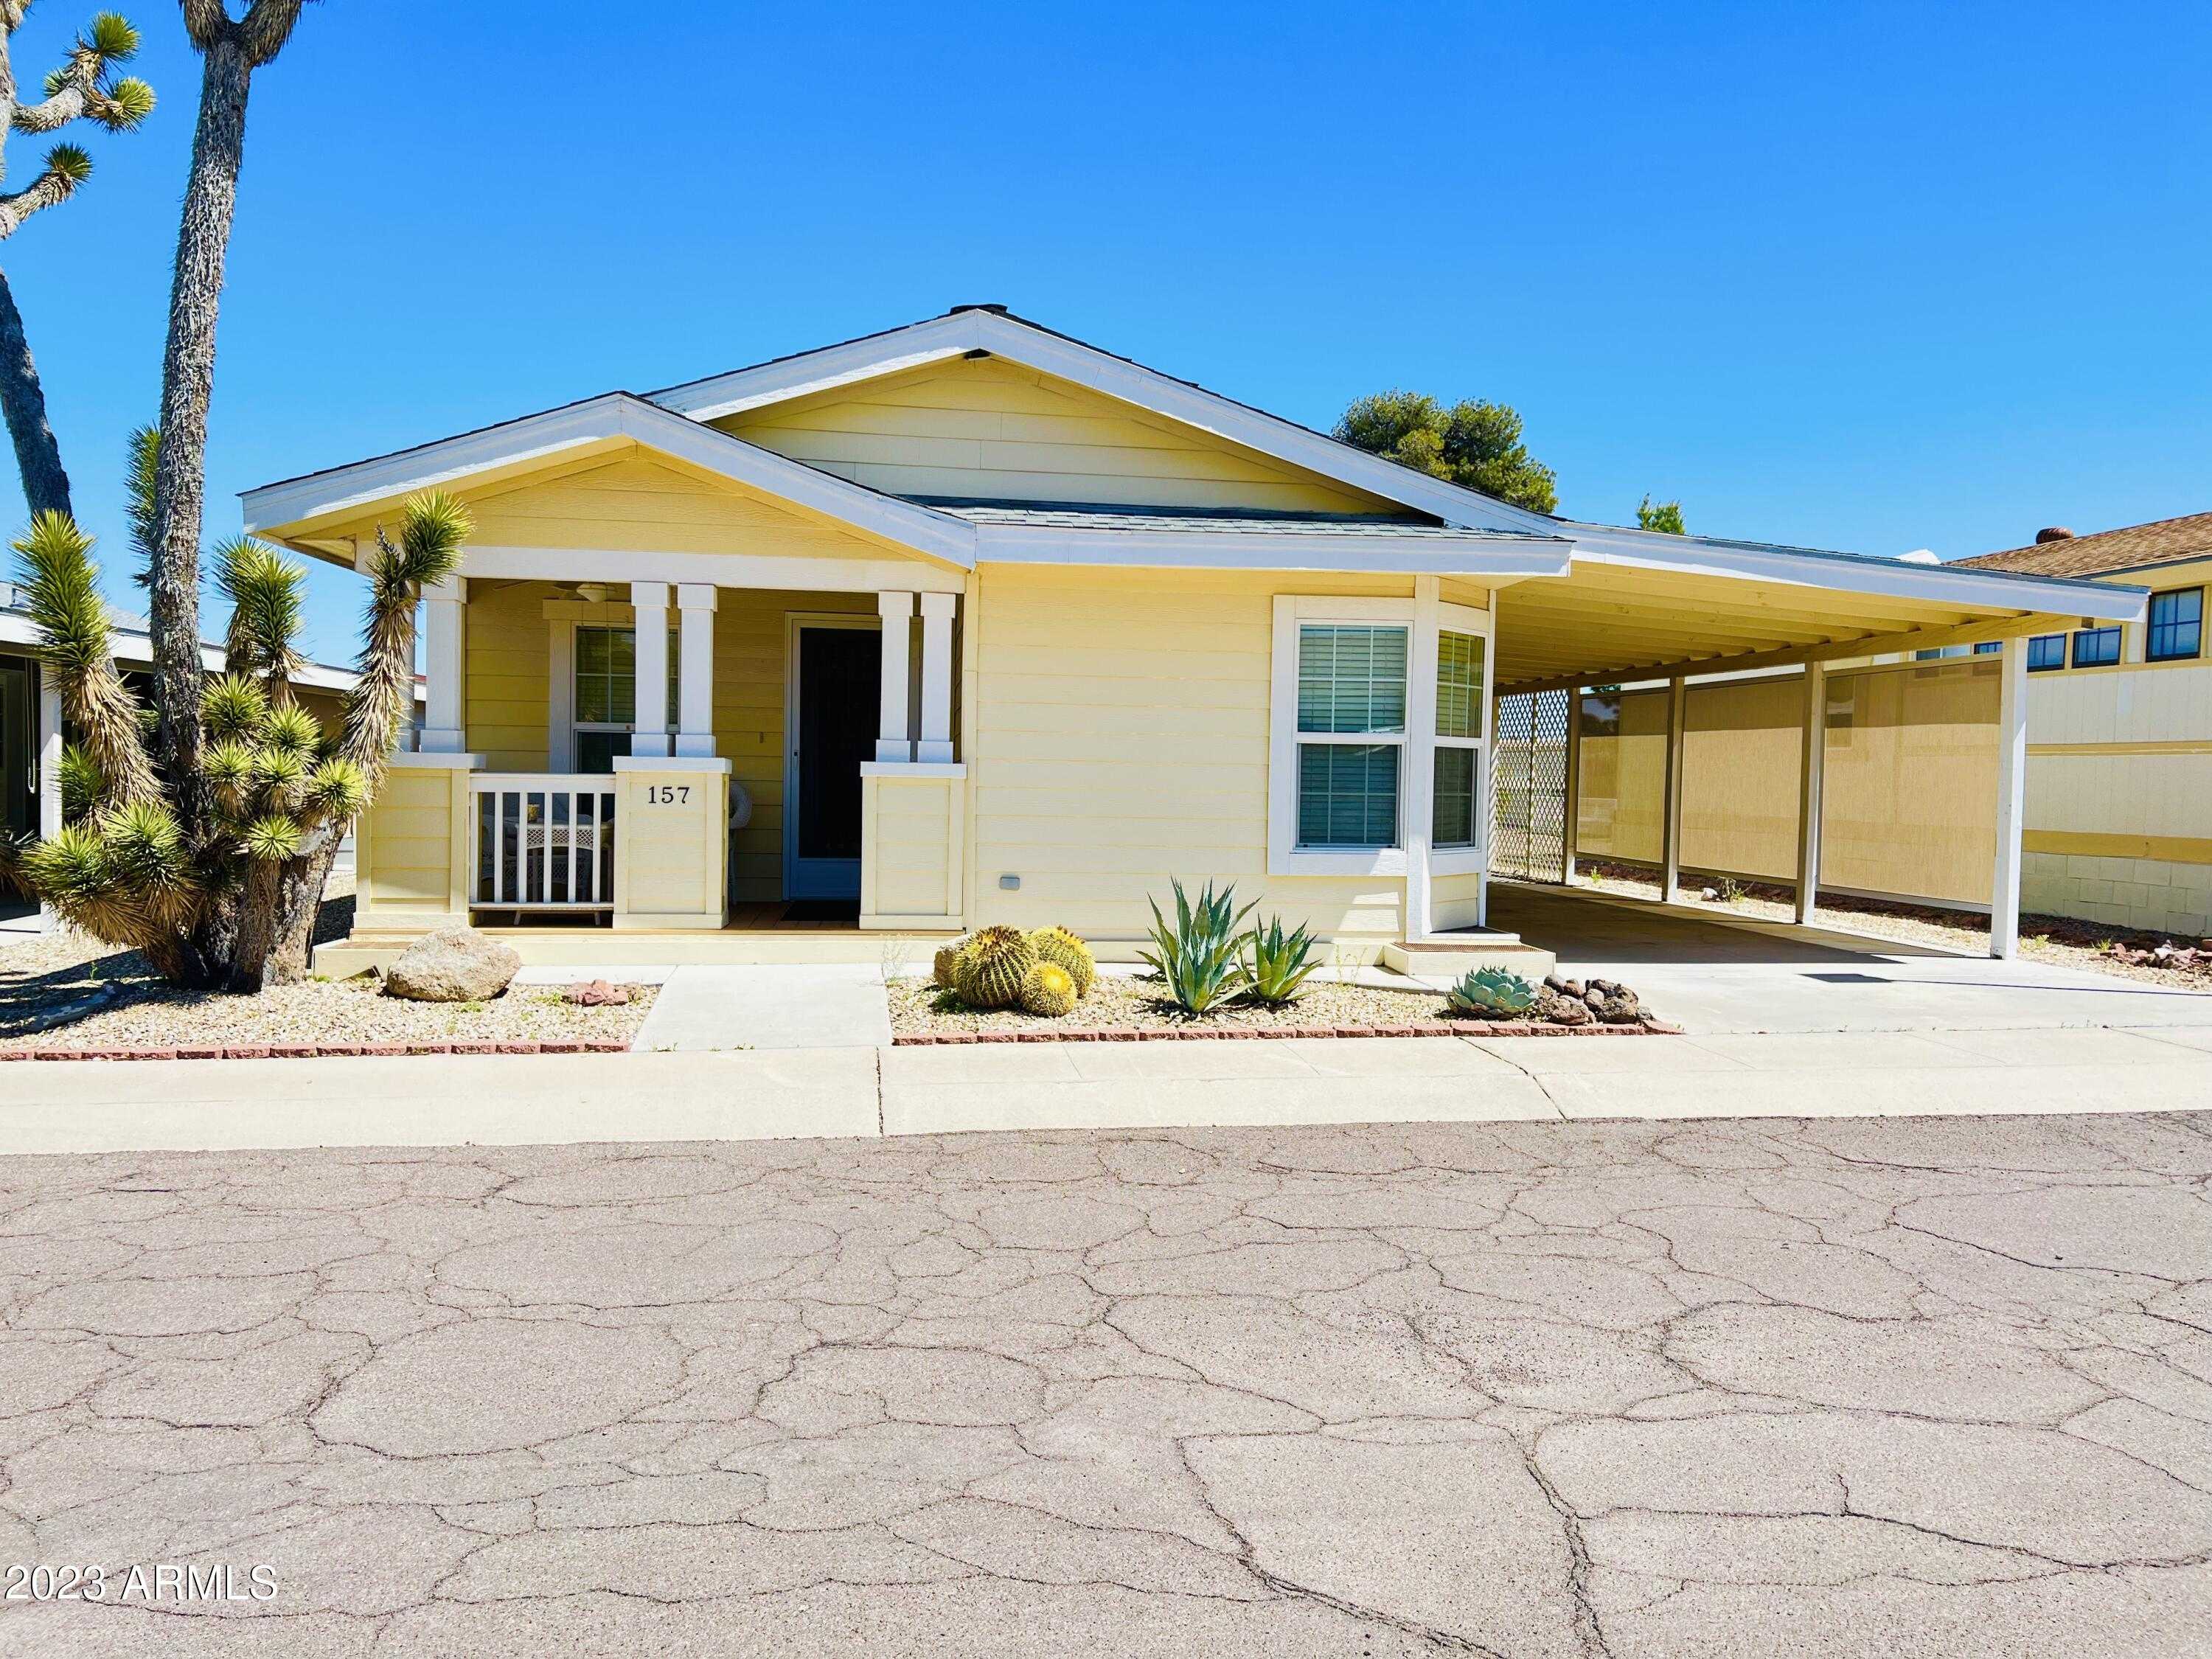 Photo 1 of 19 of 2501 W Wickenburg Way Unit 157 mobile home